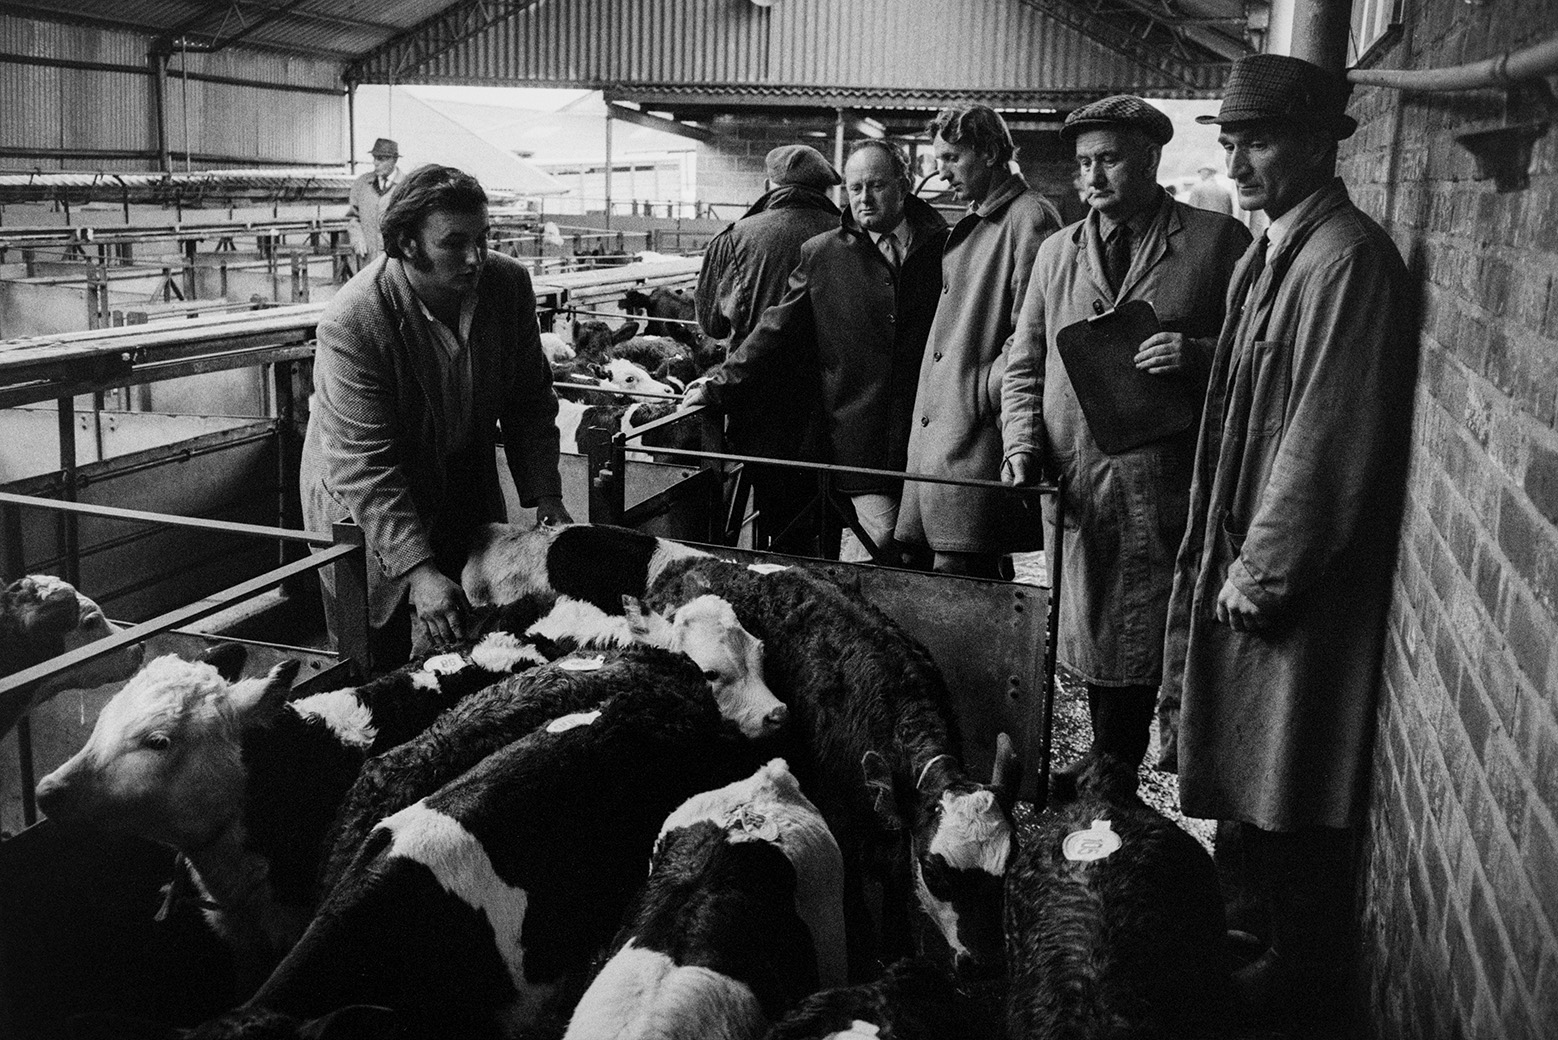 Men looking at calves in pens at Hatherleigh Market. Ivor Bourne is the third man from the right.